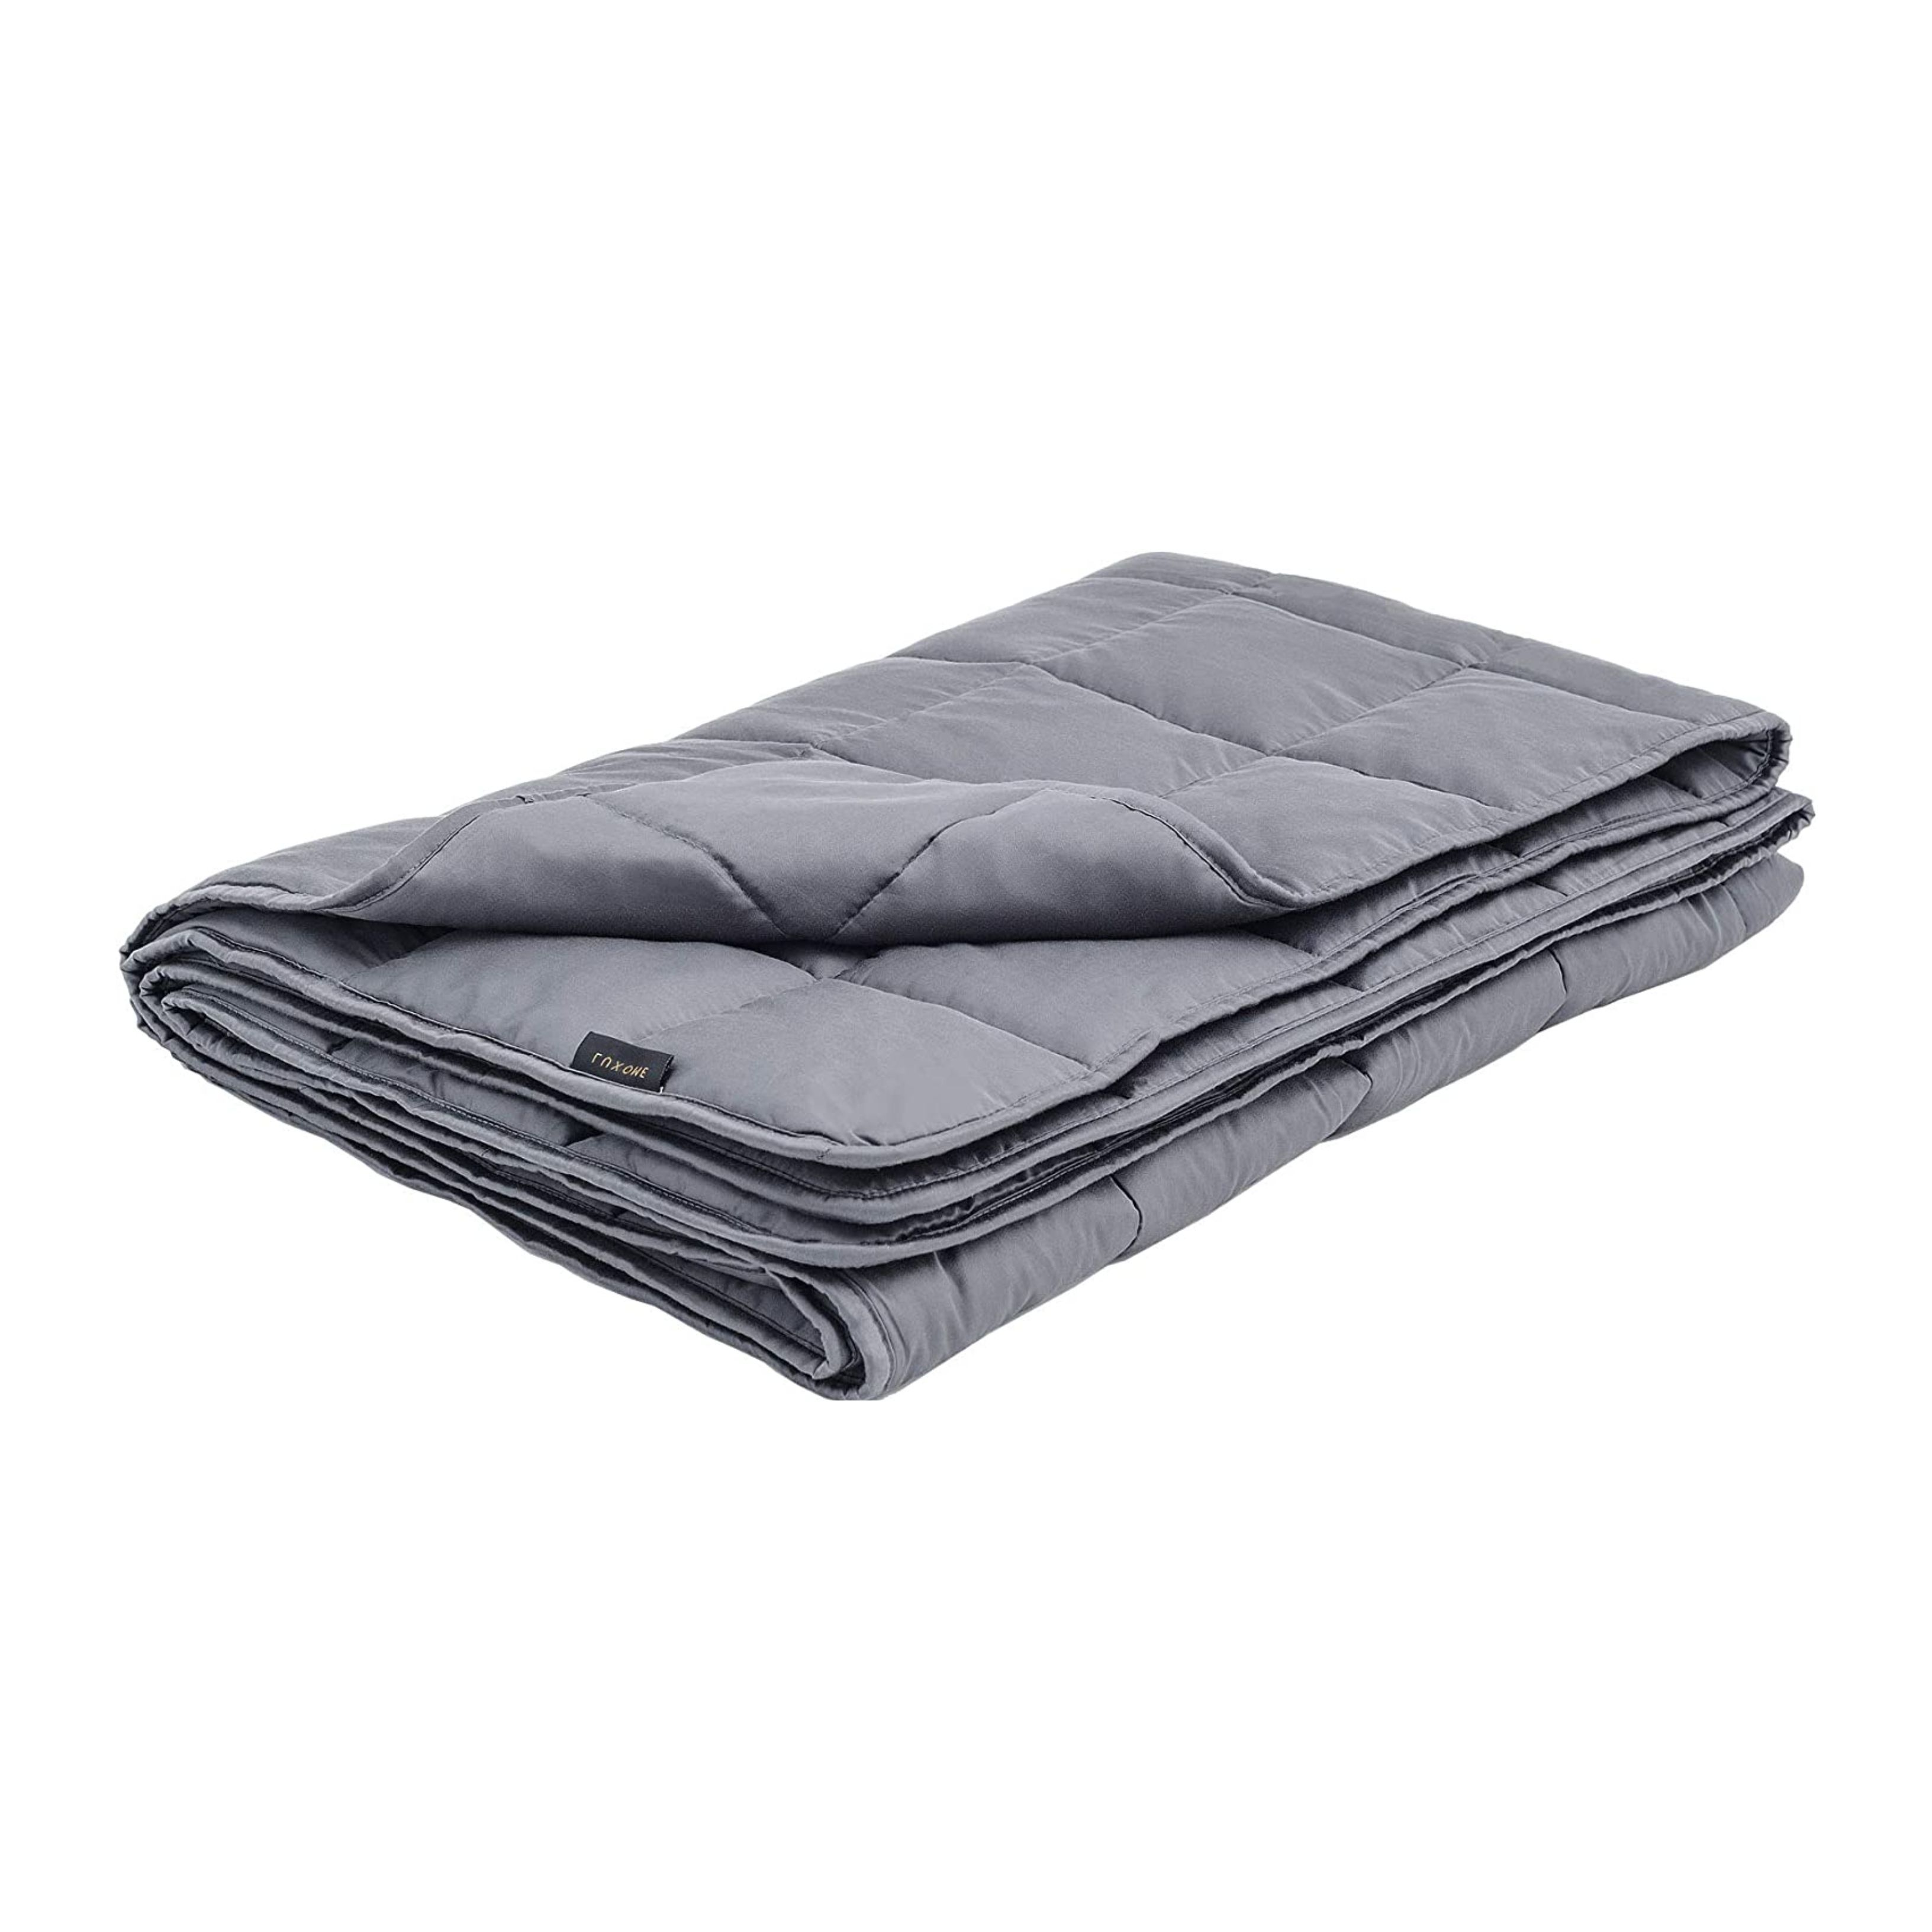 Cooling Weighted Blanket for Adults